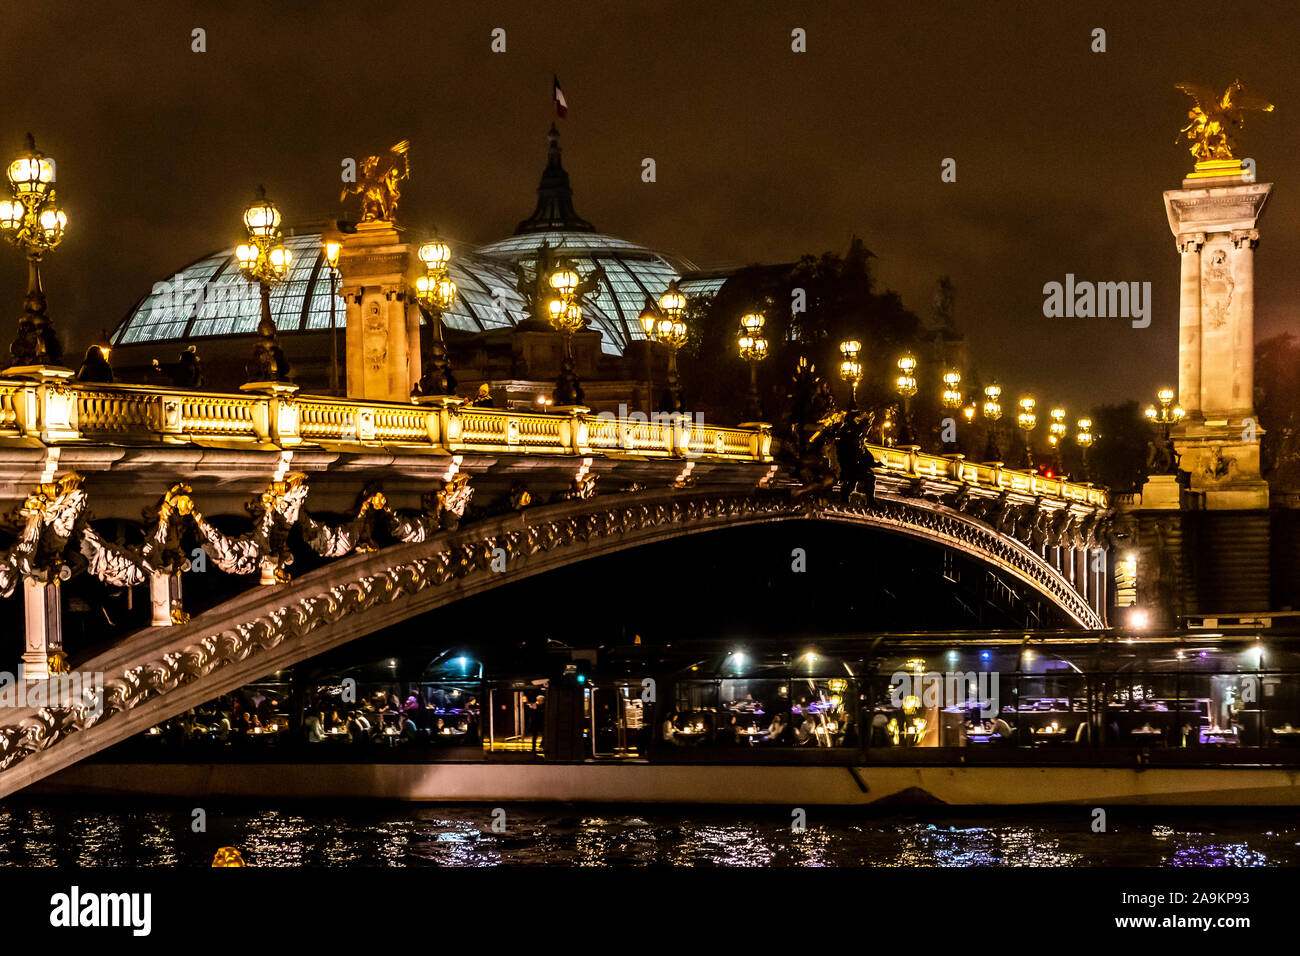 Parisian architecture, famous buildings and way of life Stock Photo